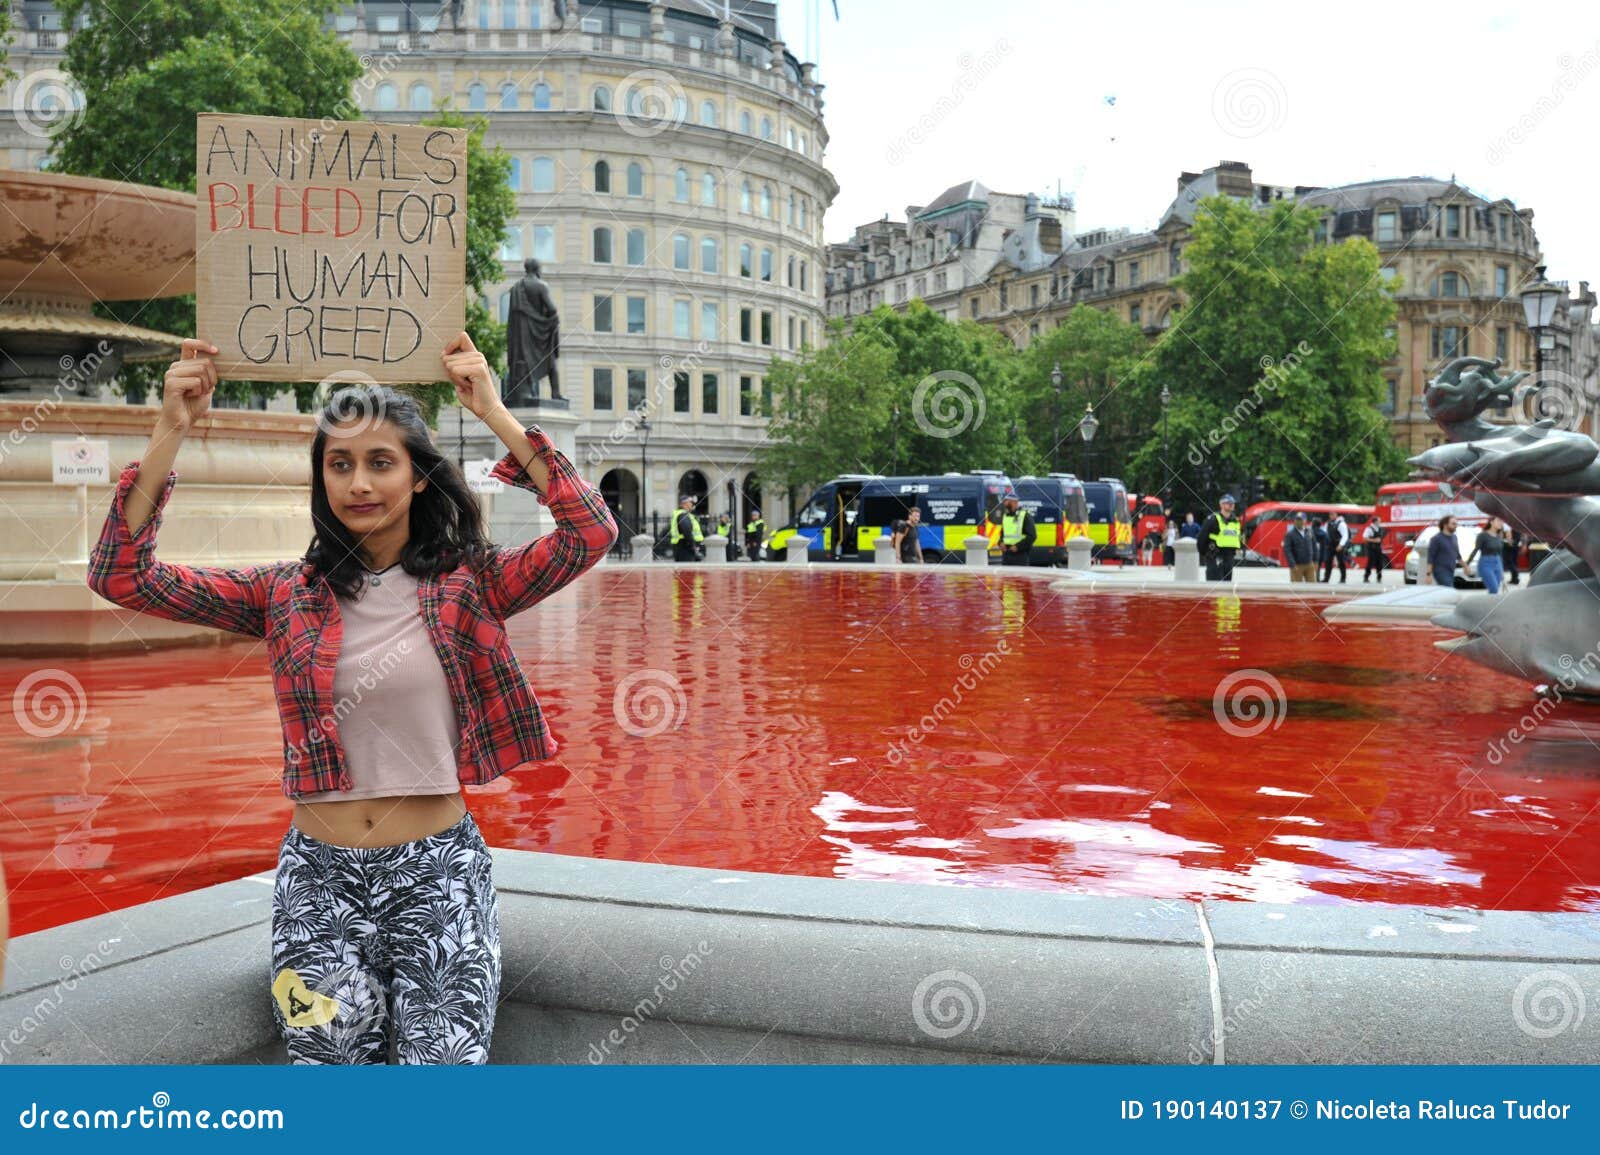 Animal Rights Activists Turn Trafalgar Square Fountains in London Blood Red  Editorial Photography - Image of covid, holding: 190140137